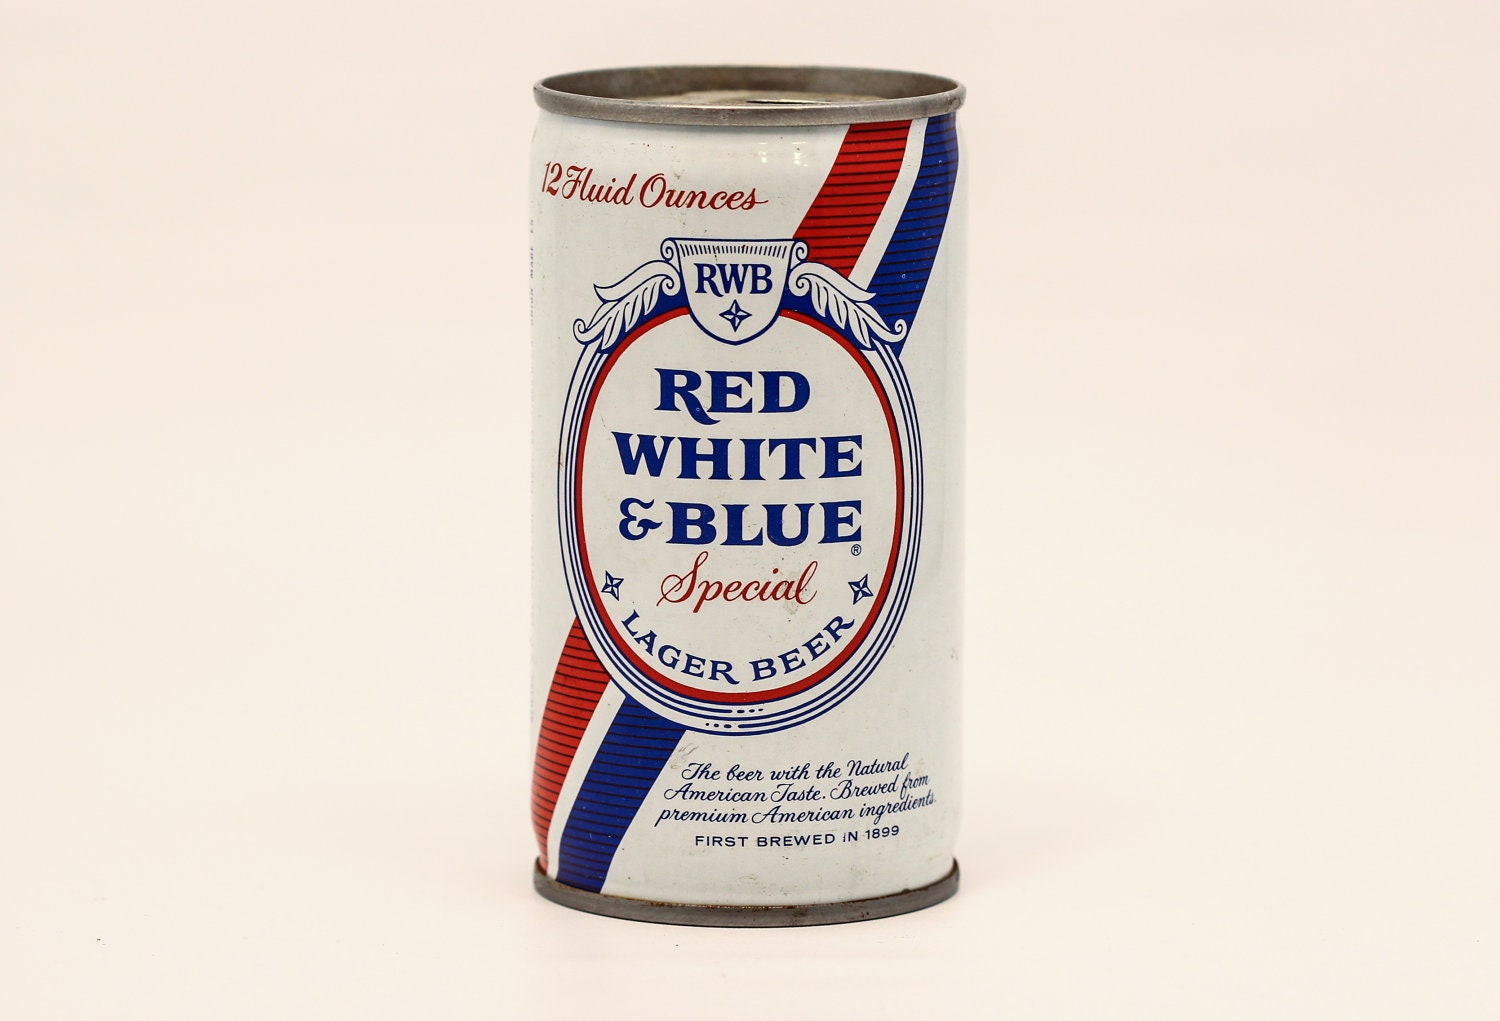 Red white blue. Ред Вайт Блю. Red & Blue Beverages[. Пиво Blue book. Blues and Beer Company.